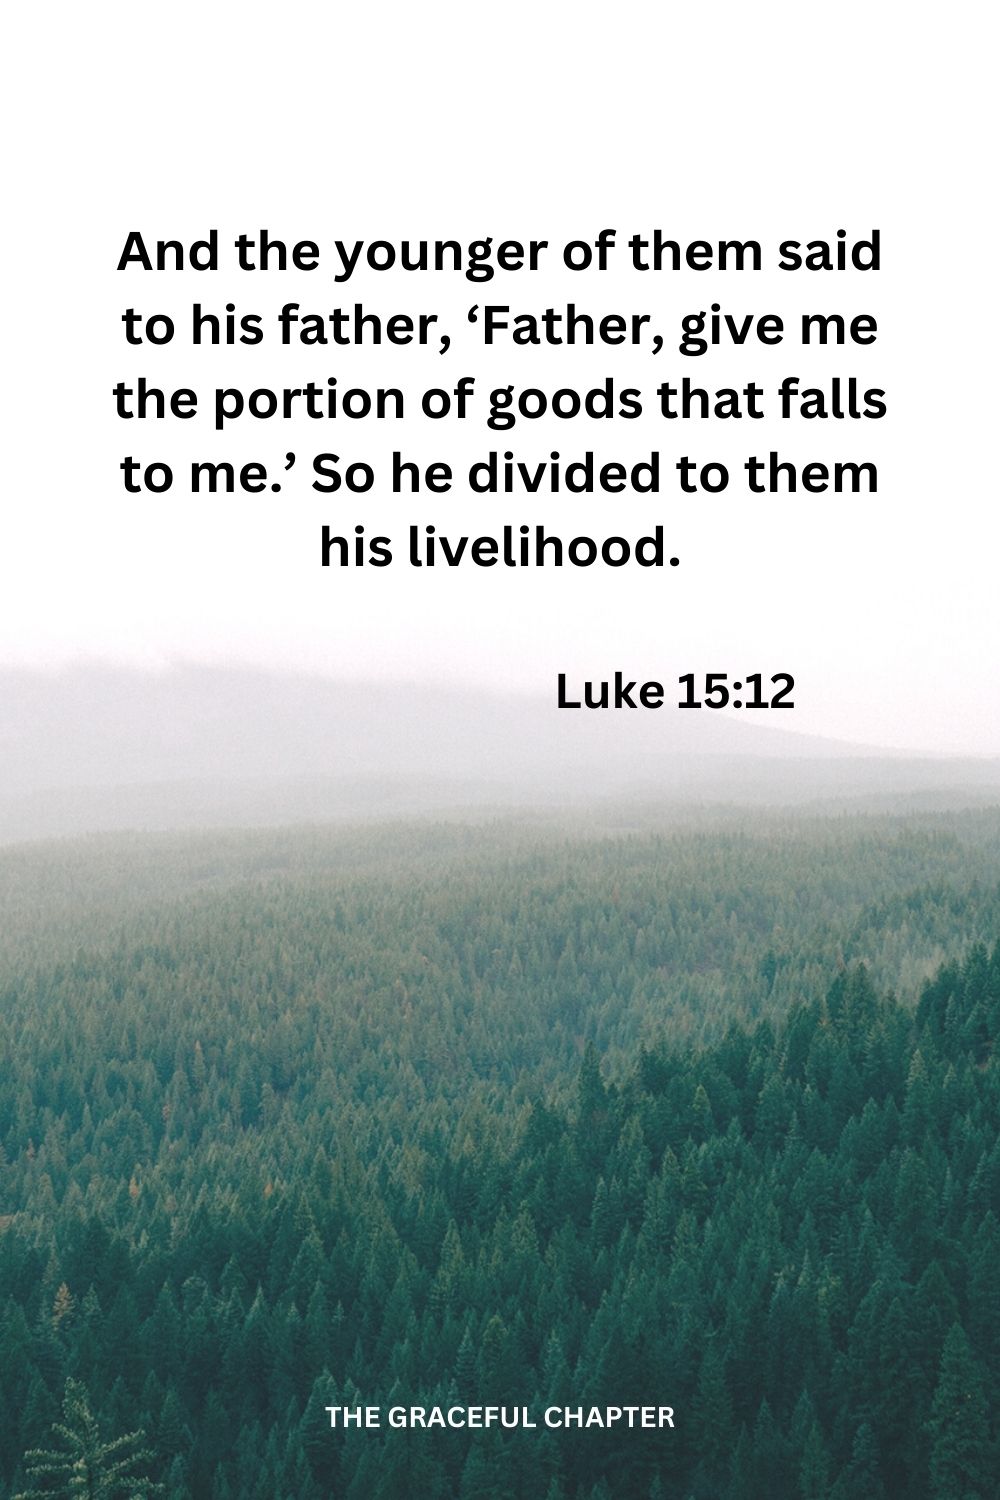 And the younger of them said to his father, ‘Father, give me the portion of goods that falls to me.’ So he divided to them his livelihood.